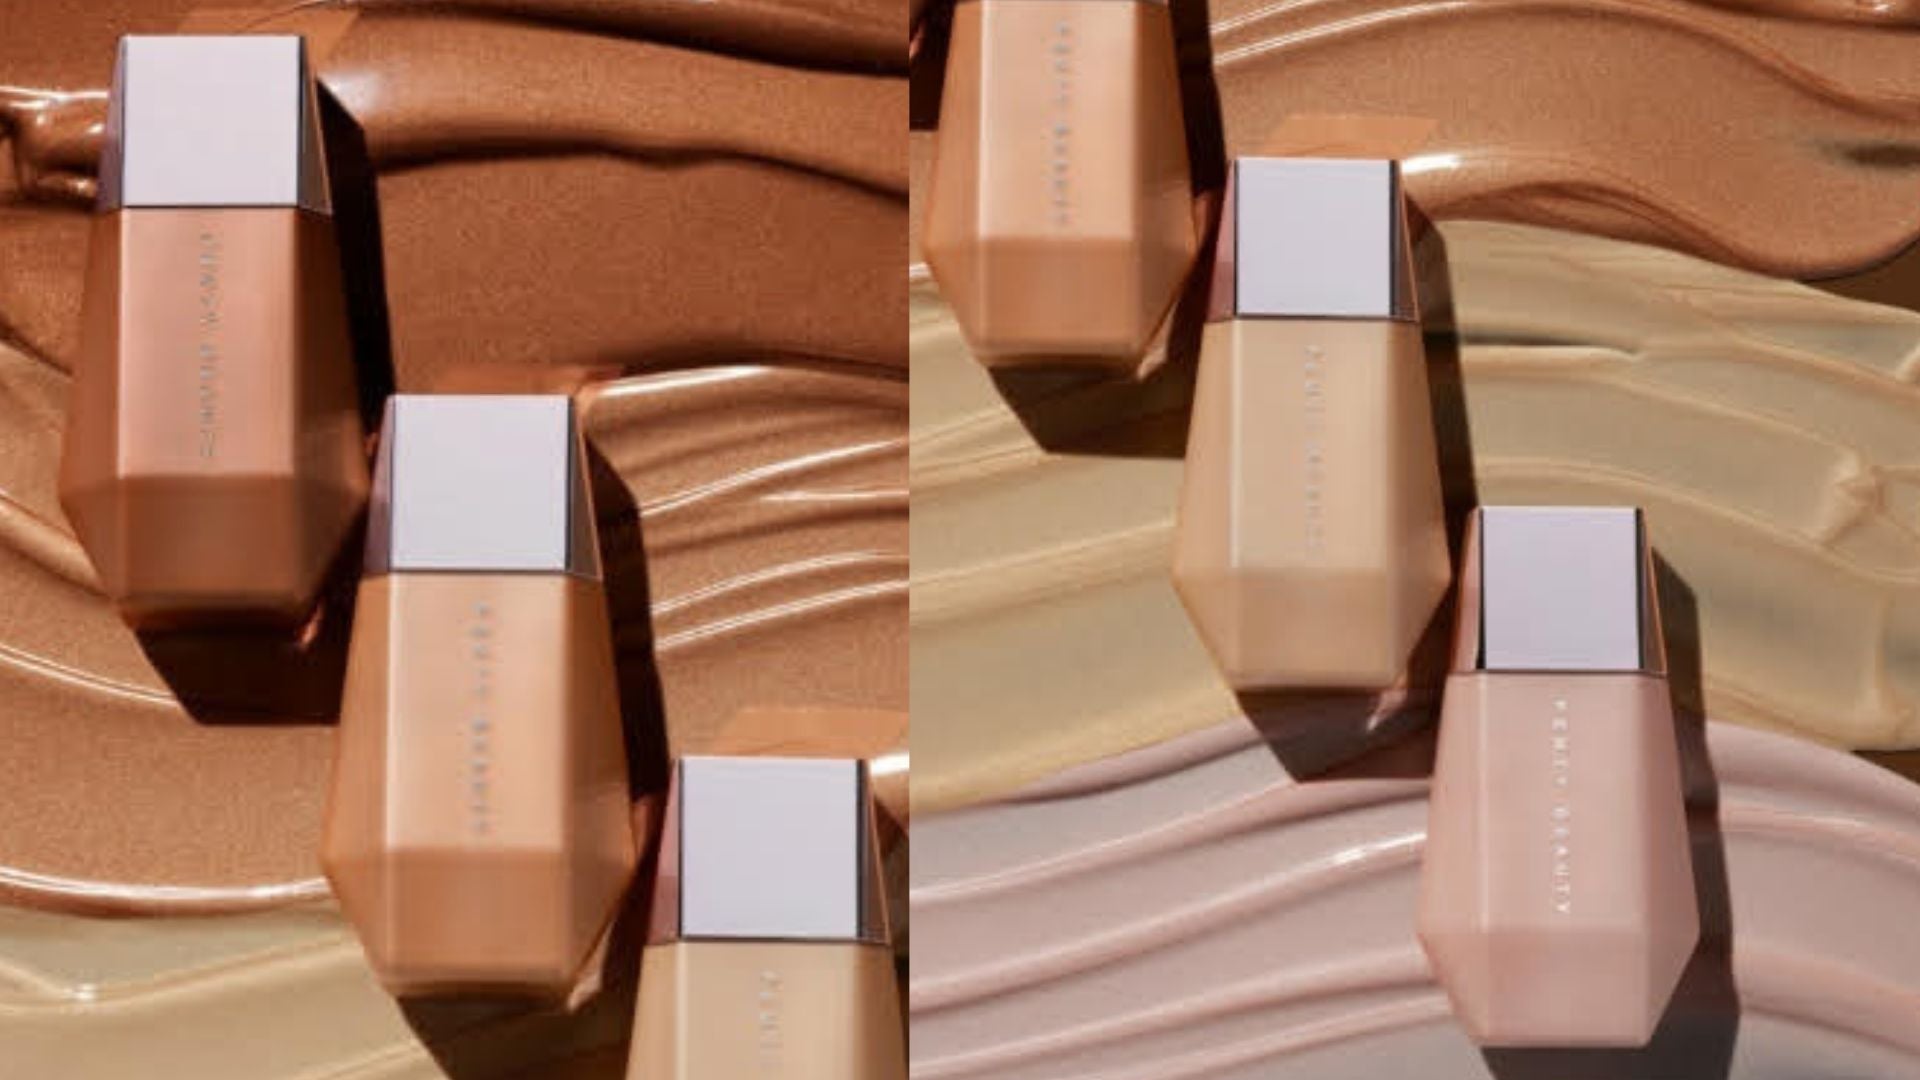 review, photos, ingredients, makeup, trends, 2022, 2023, fenty beauty, rihanna, eaze drop'lit all-over glow enhancer, how to achieve glowing summer makeup, ulta beauty, sephora, kohl's, best glowing skincare products, natural glow